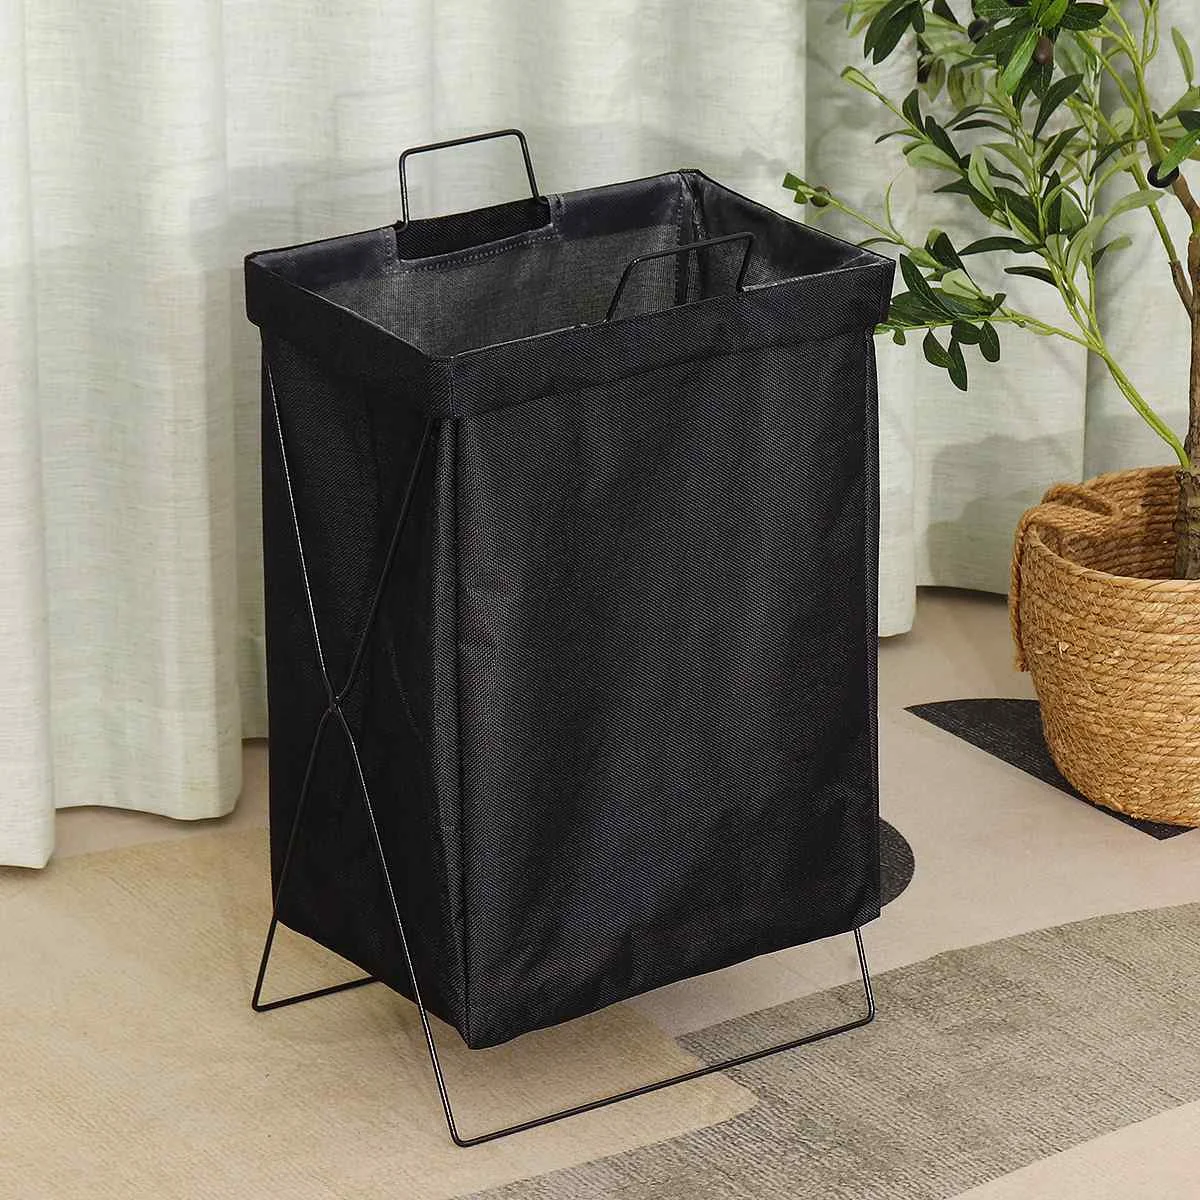 Three Grid Storage Basket with Wheels Collapsible Hamper Dstring Laundry Ba R5N9 